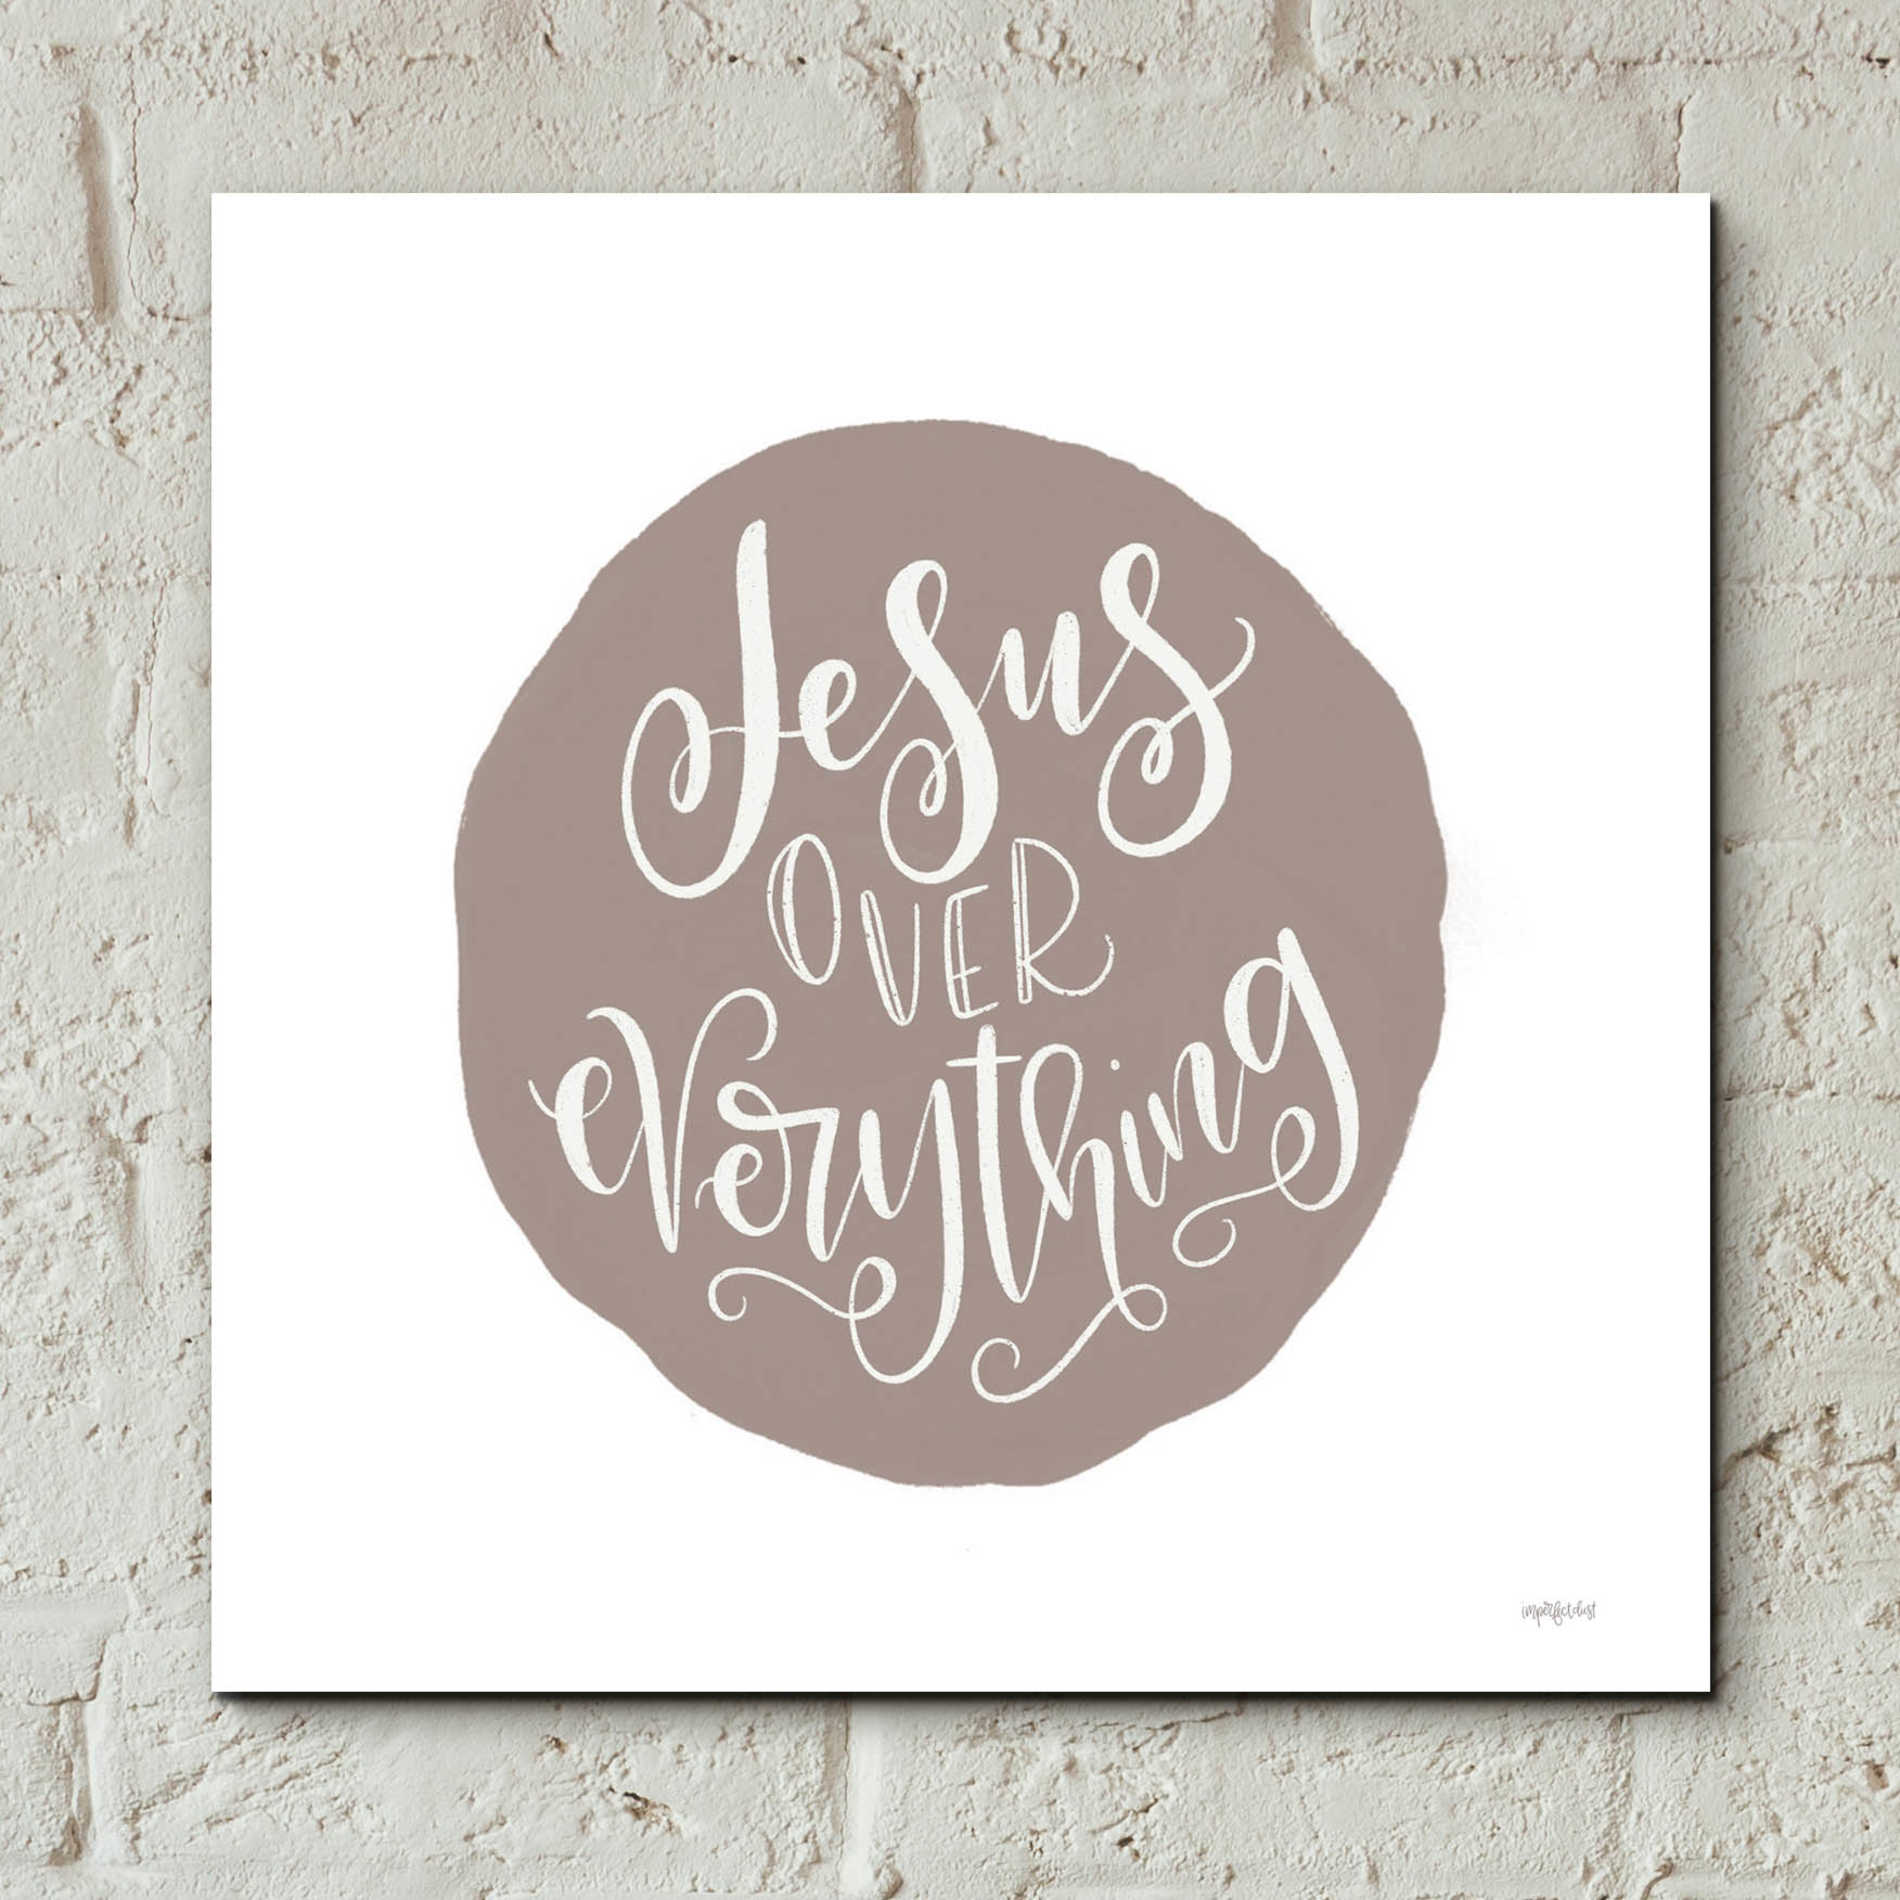 Epic Art 'Jesus Over Everything' by Imperfect Dust, Acrylic Glass Wall Art,12x12